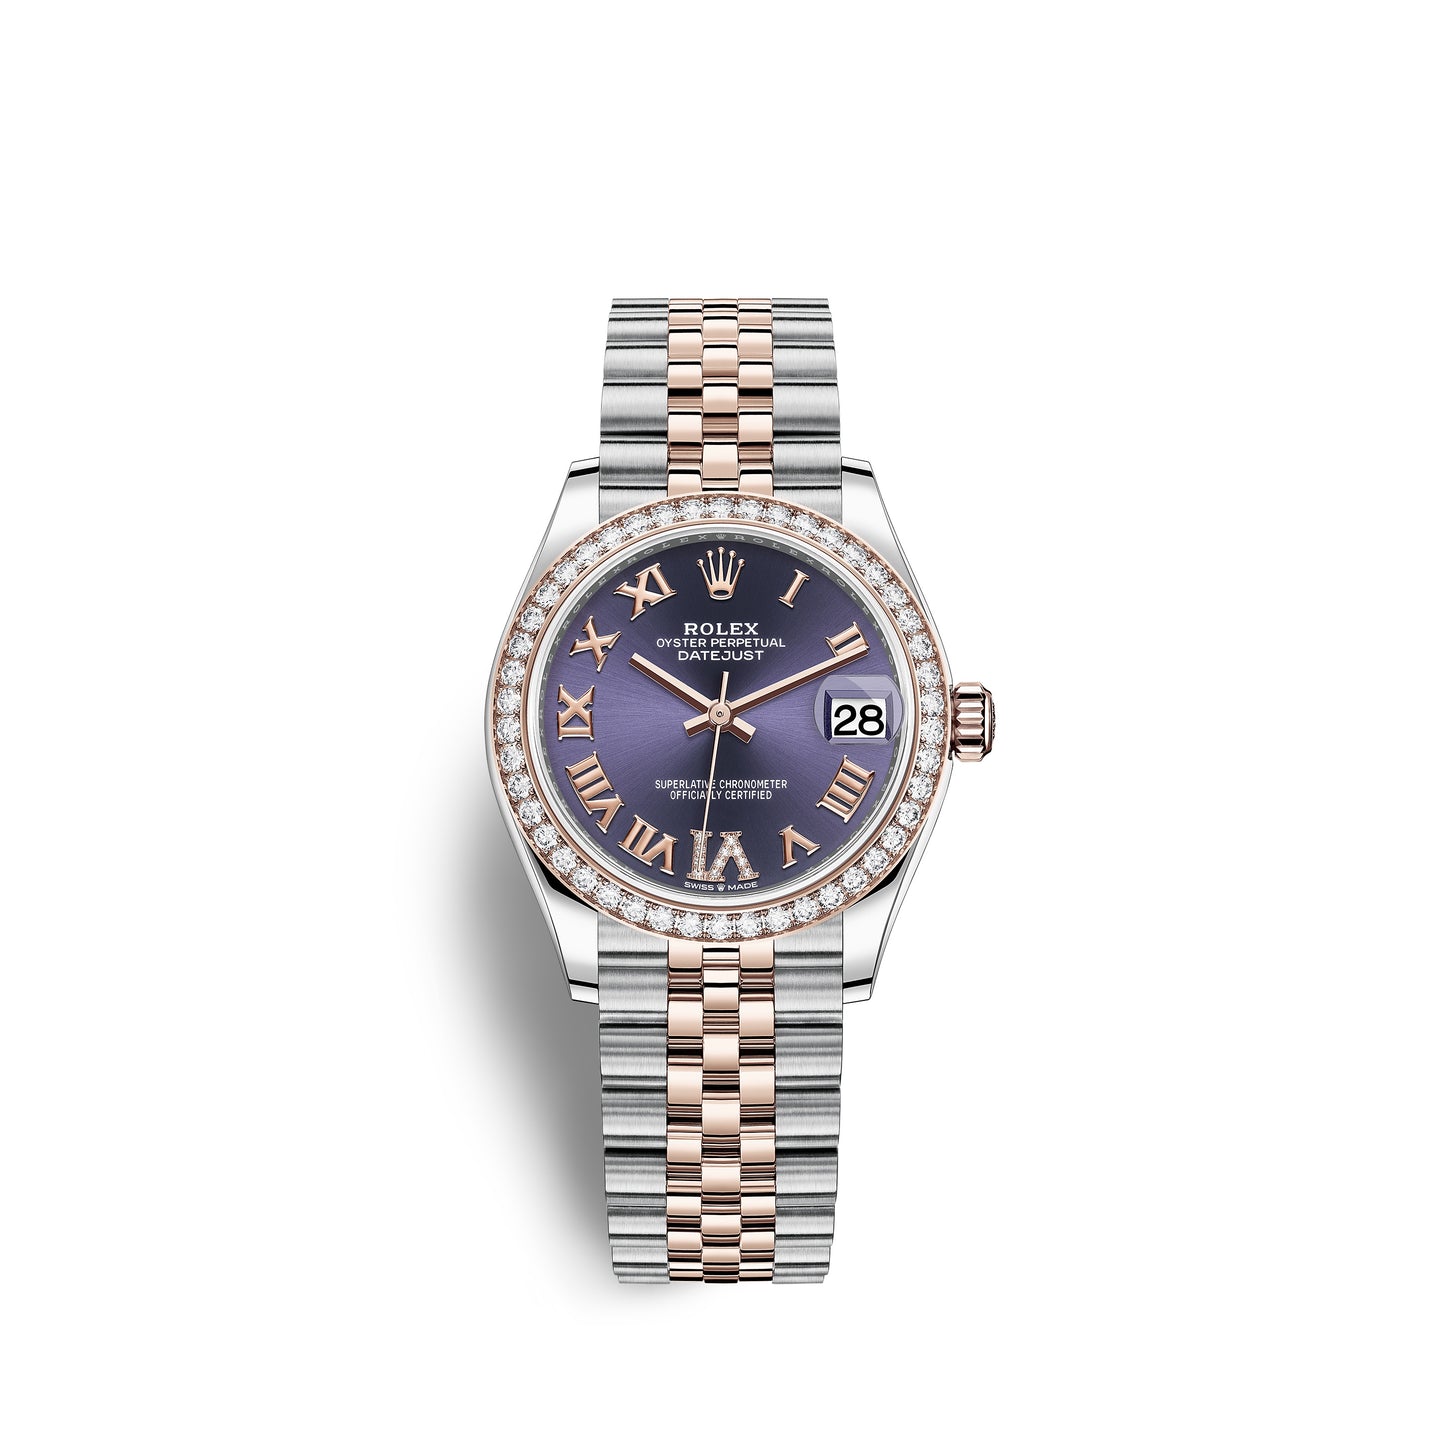 Rolex Datejust 31, Oystersteel, 18kt Everose Gold and diamonds, Ref# 278381RBR-0020